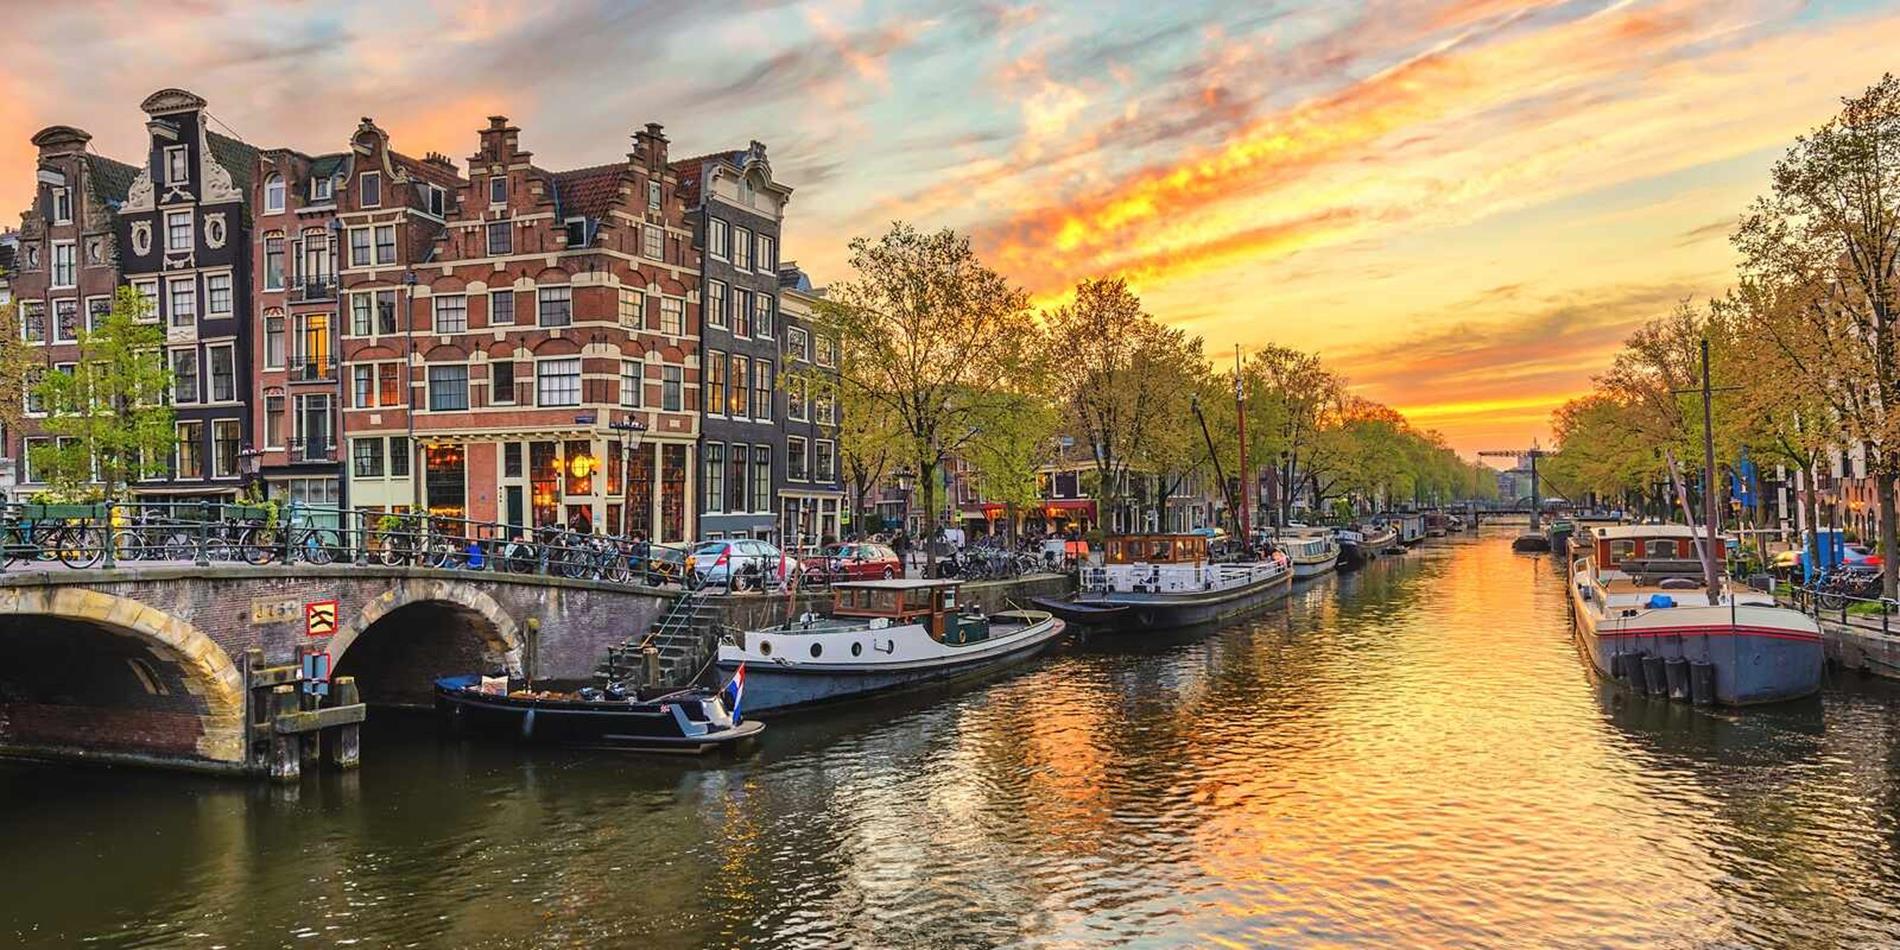 Sun setting over the canal waterfront in Amsterdam